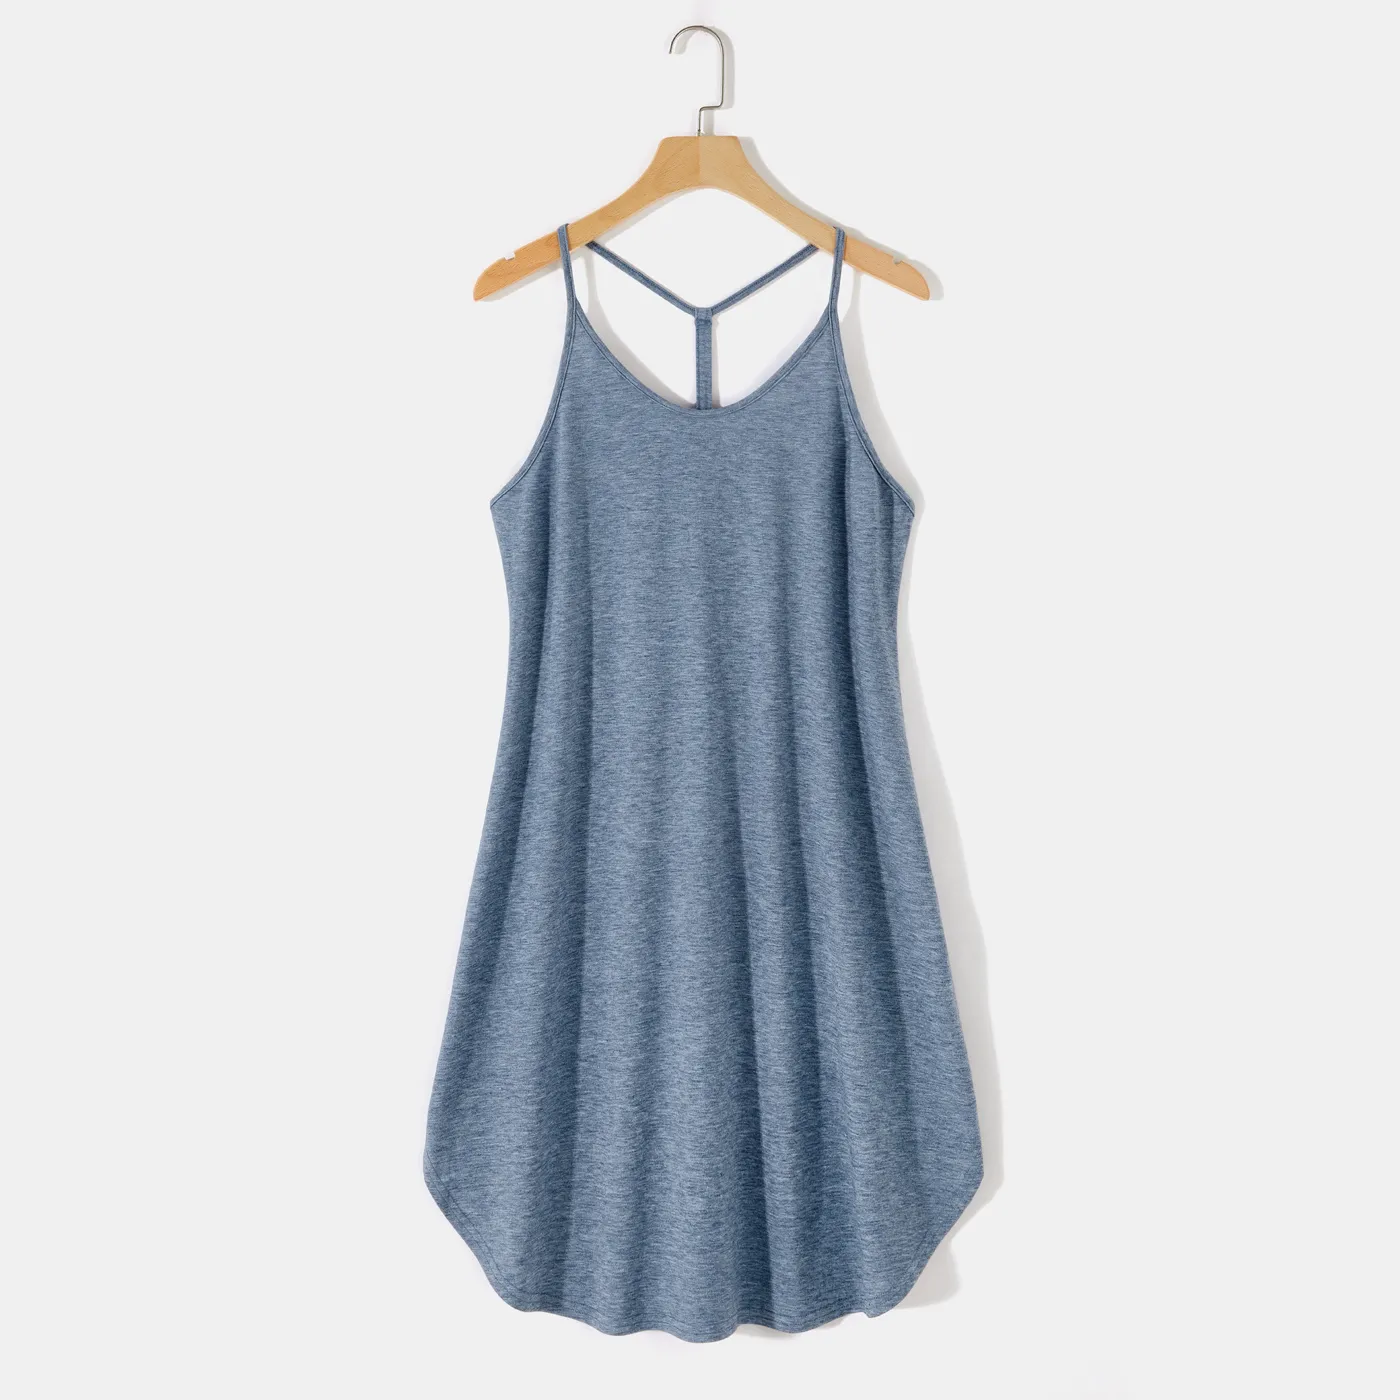 Solid 95% Cotton Slip Dress For Mom And Me